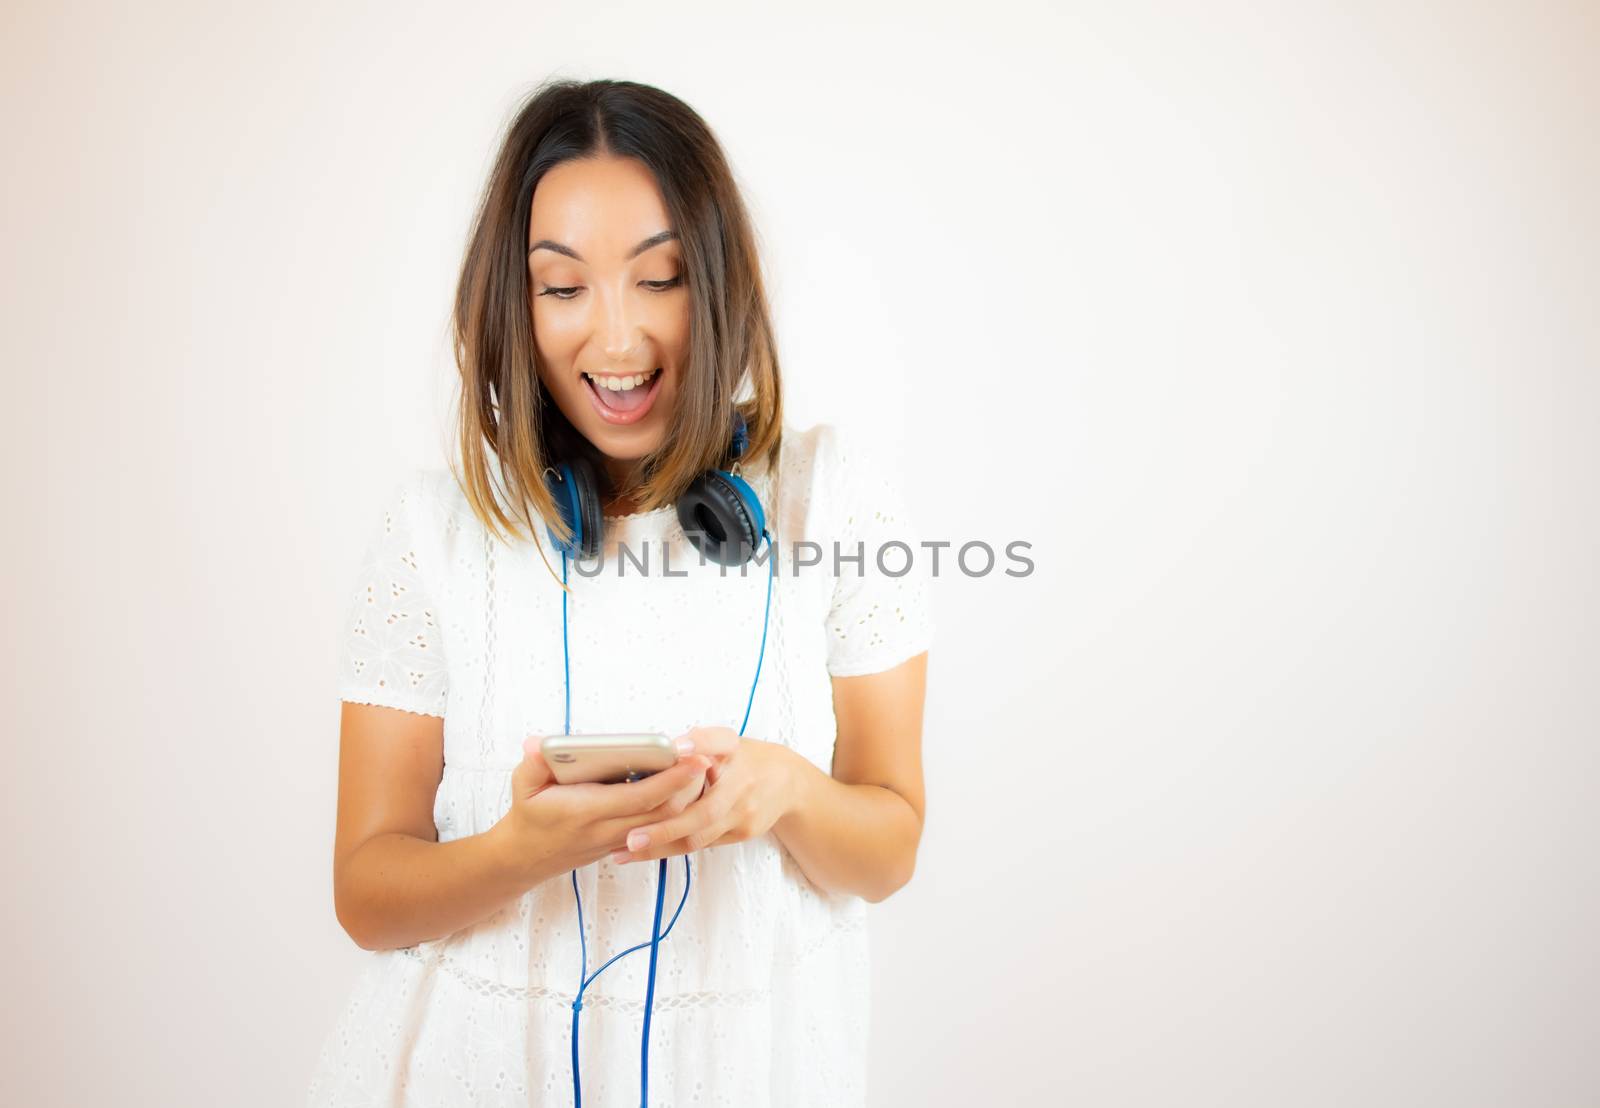 Beautiful woman in white dress with headphones